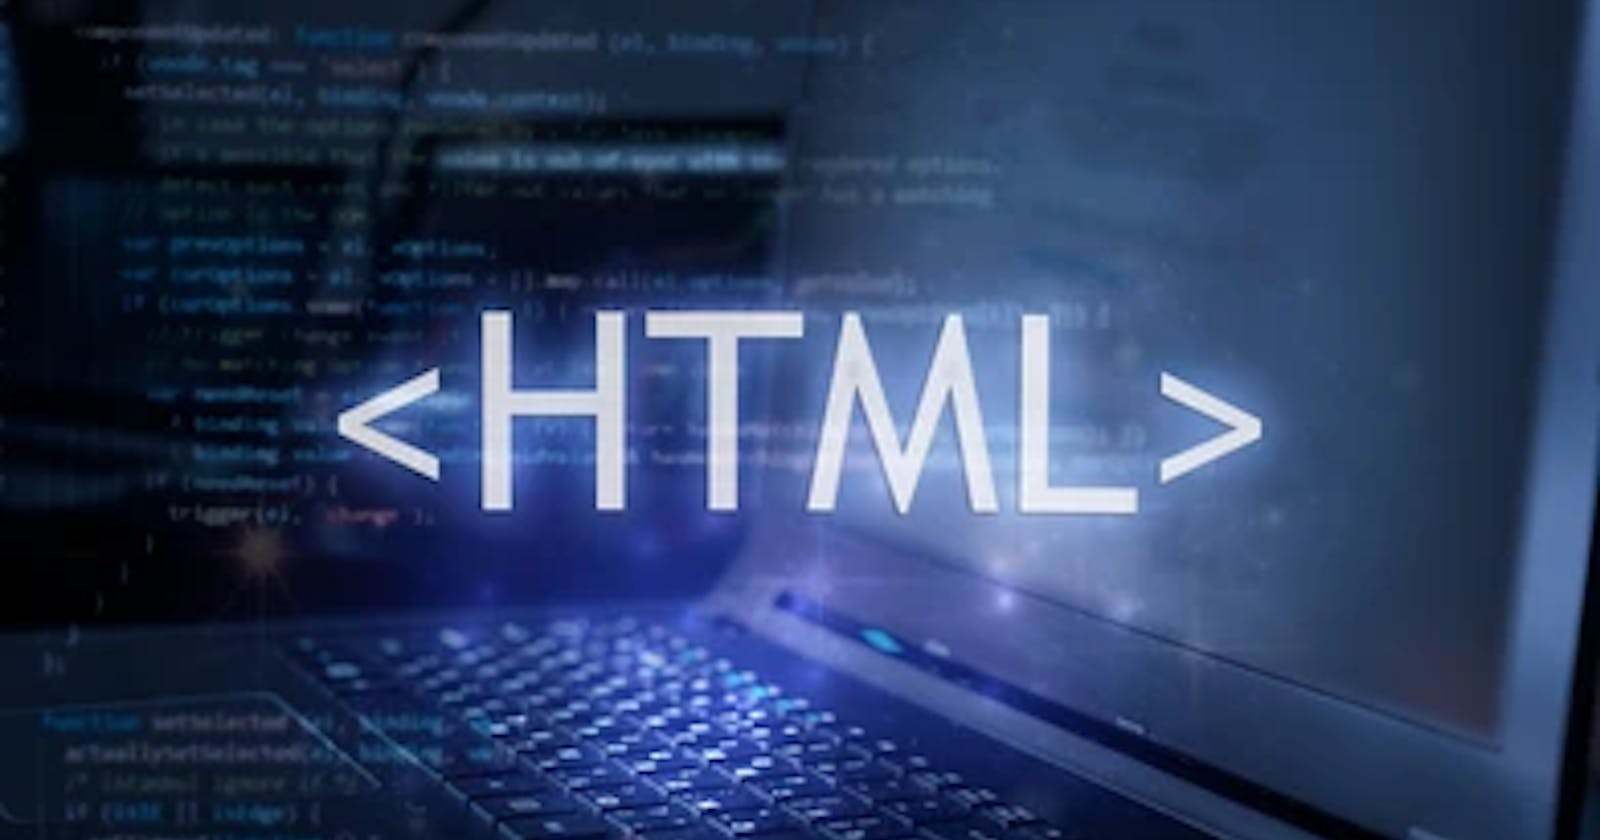 All About  HTML ELEMENTS:-